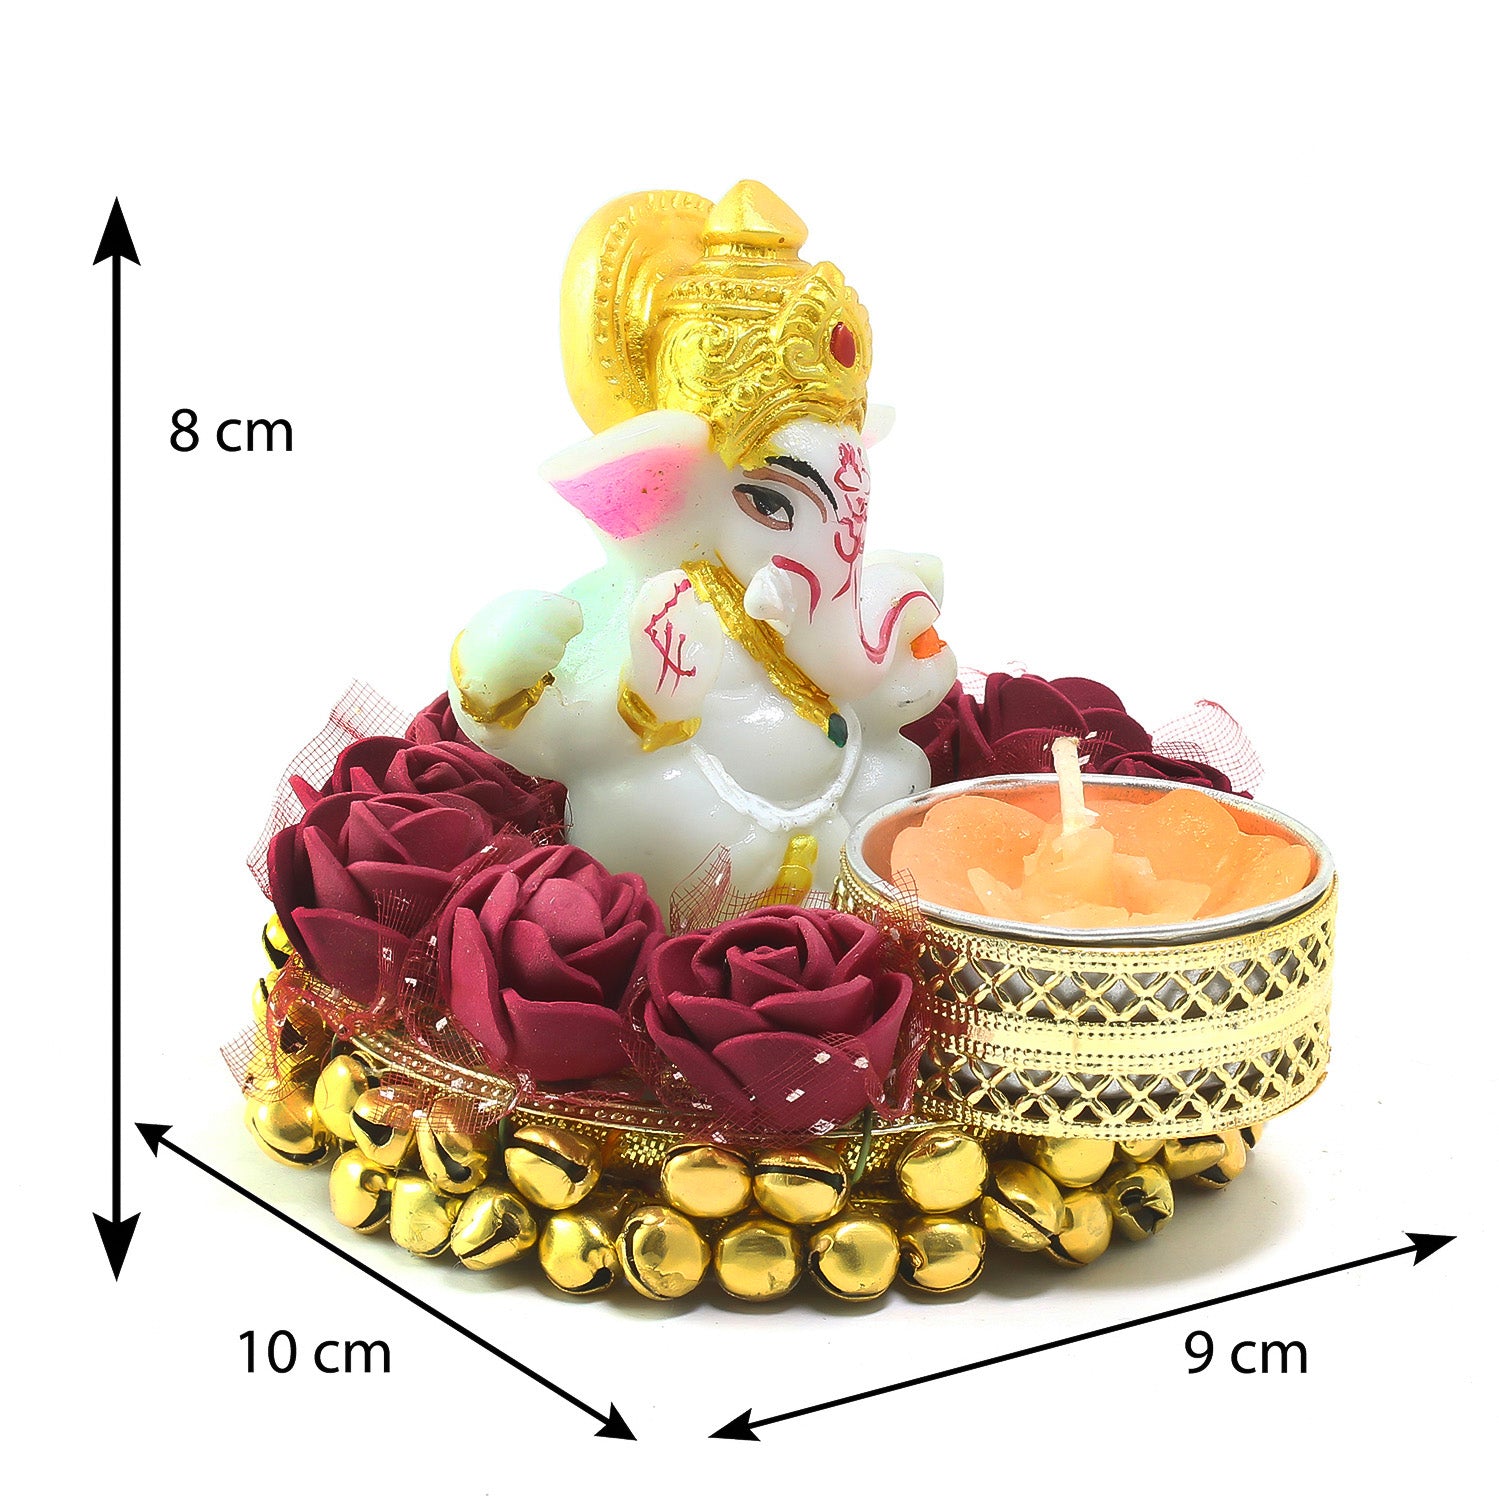 Metal and Polyresin Lord Ganesha Idol on Decorative Plate with Tea Light Candle Holder 2